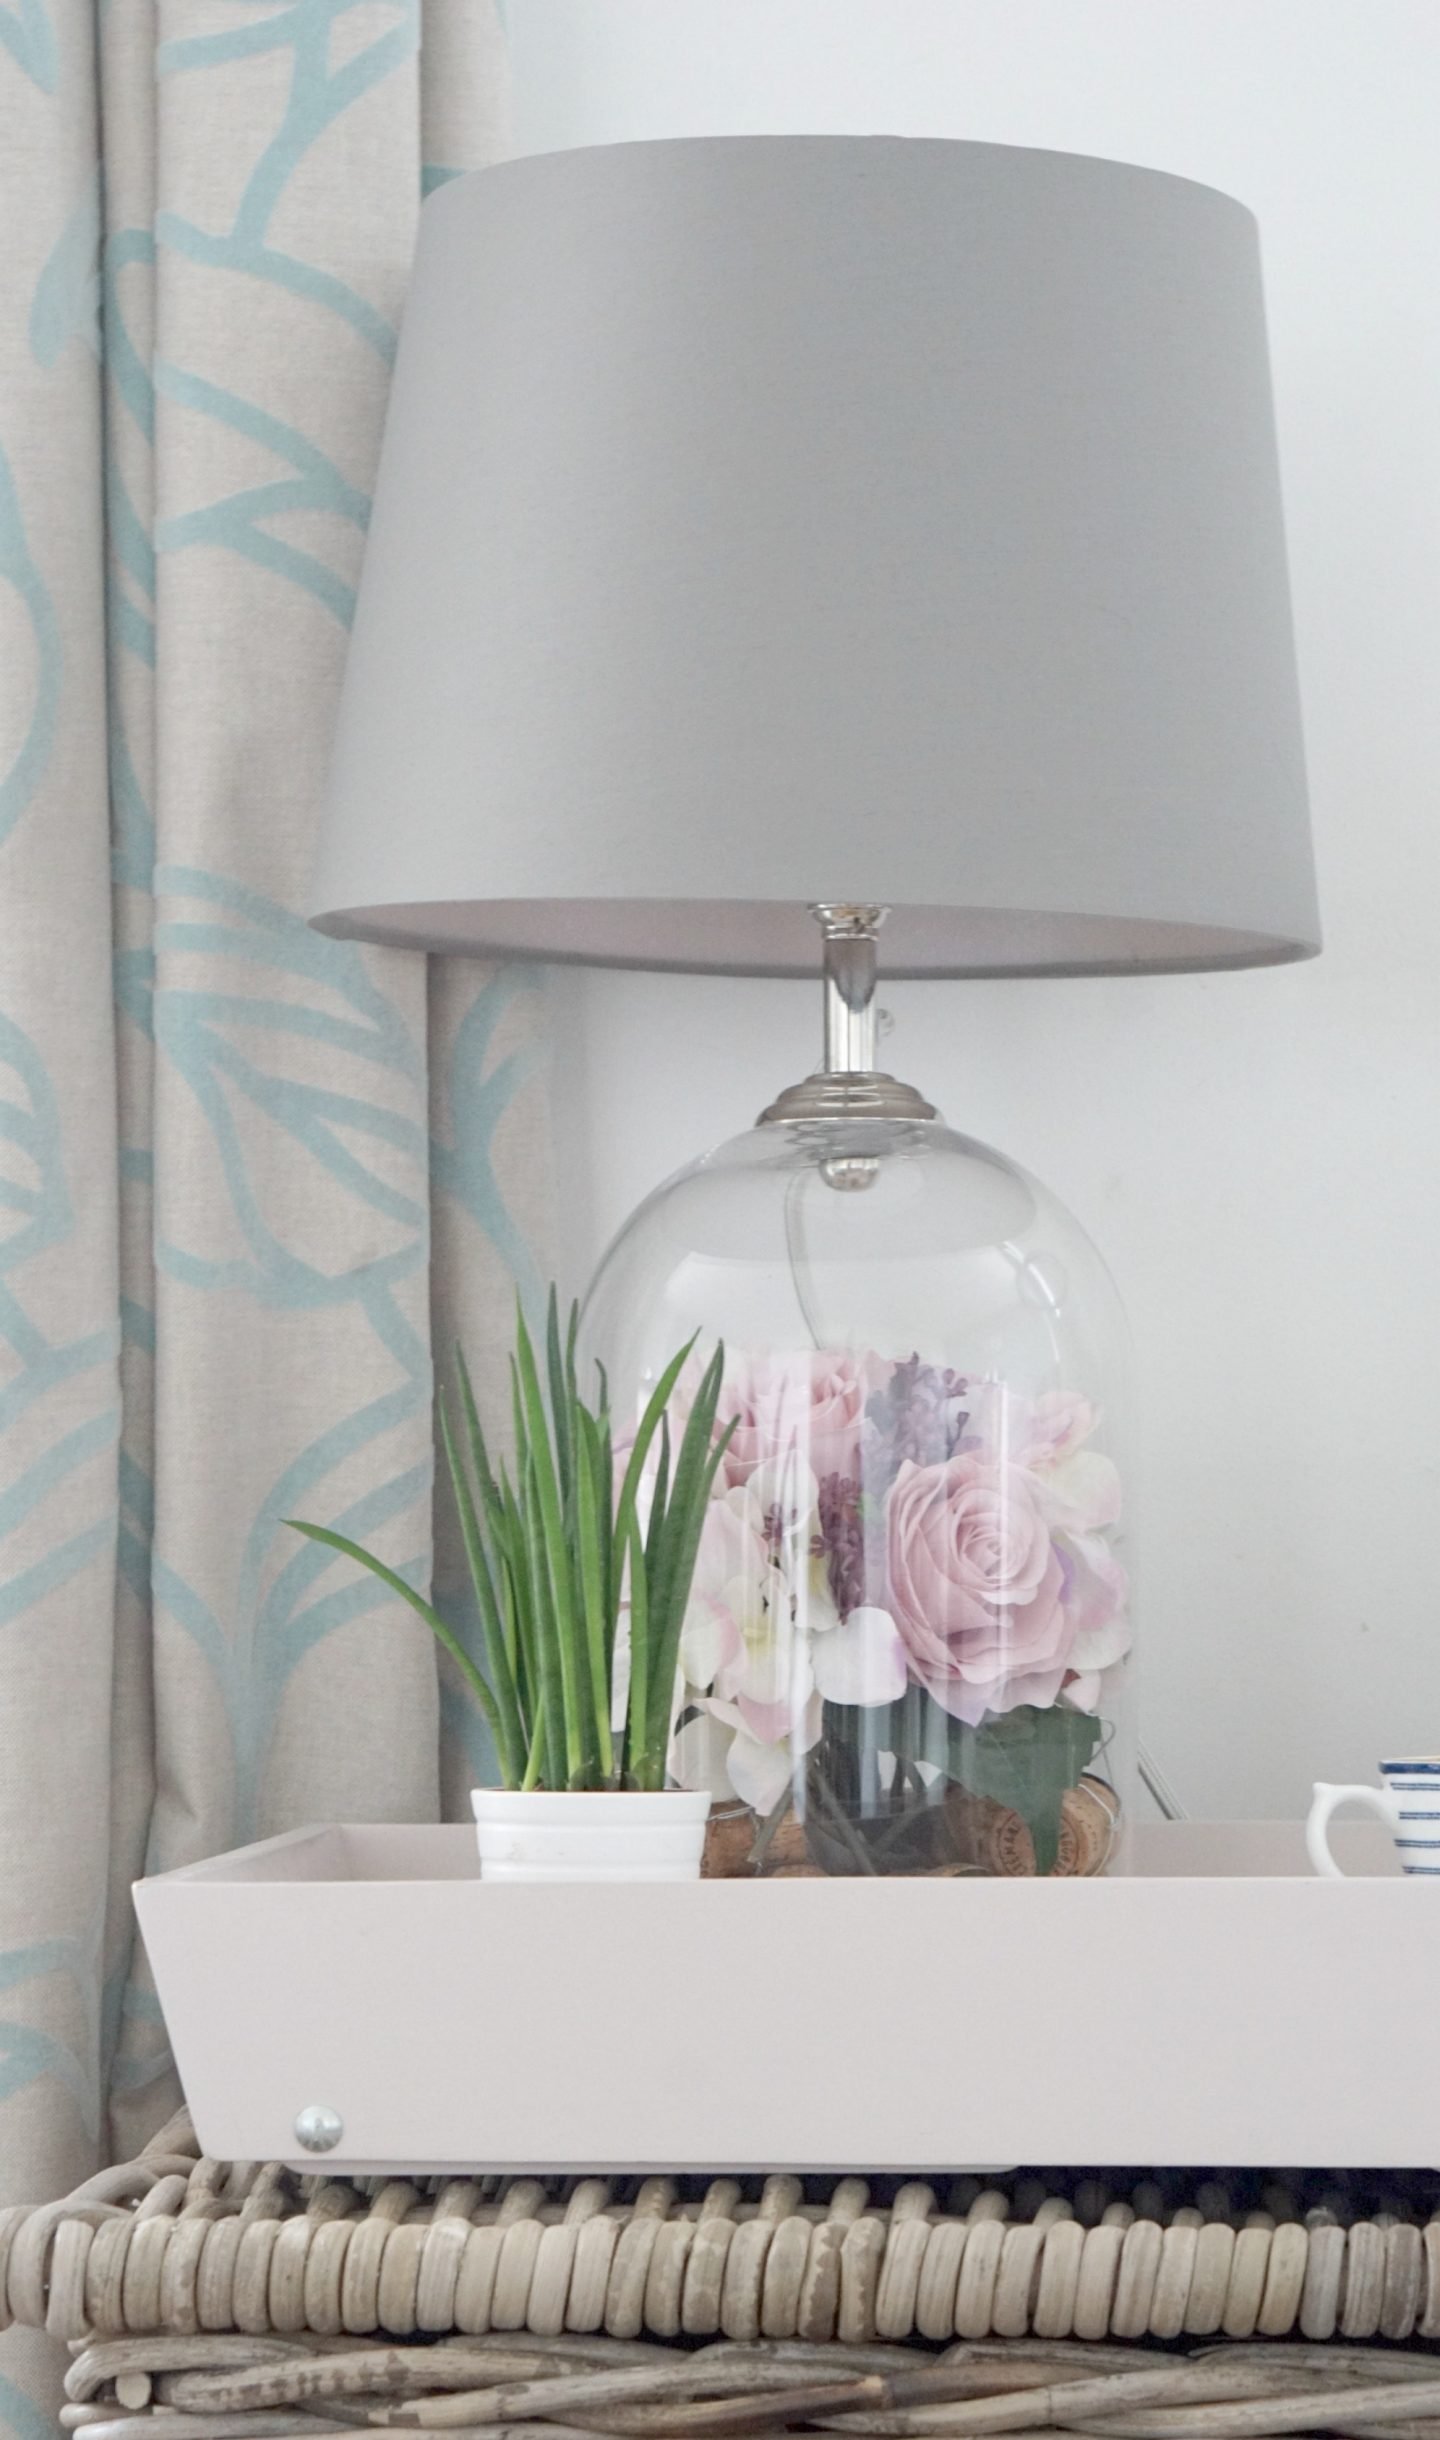 Choosing a shabby chic style for you home and how to choose a decor that is cool but different. And how to make a rustic coffee table with a wicker basket, decorated with a dome lamp and realistic looking artificial flowers. 